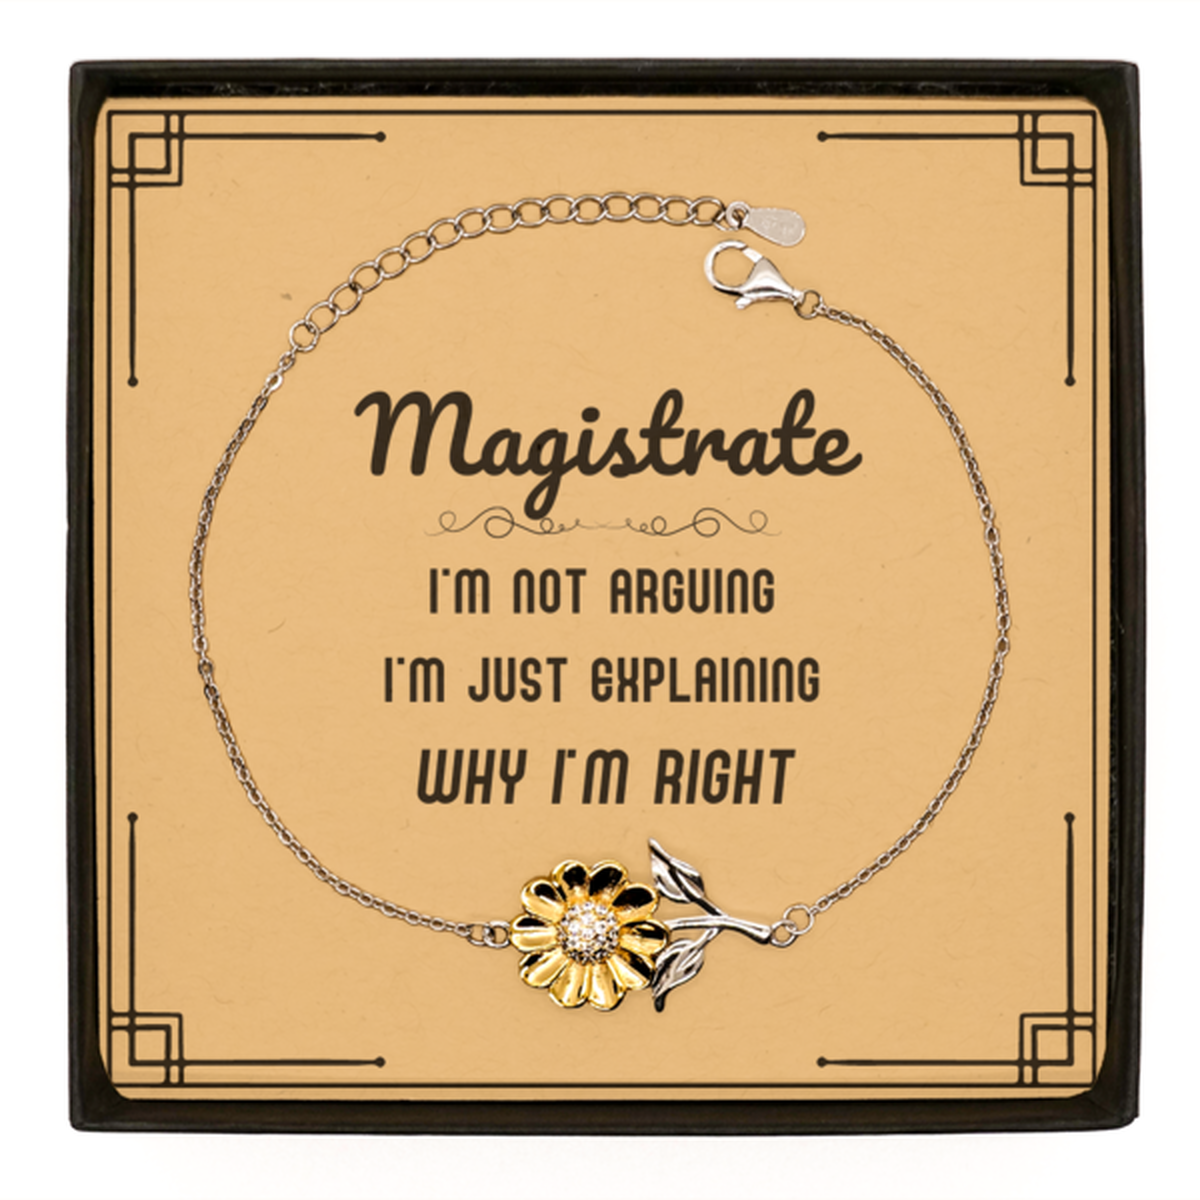 Magistrate I'm not Arguing. I'm Just Explaining Why I'm RIGHT Sunflower Bracelet, Funny Saying Quote Magistrate Gifts For Magistrate Message Card Graduation Birthday Christmas Gifts for Men Women Coworker